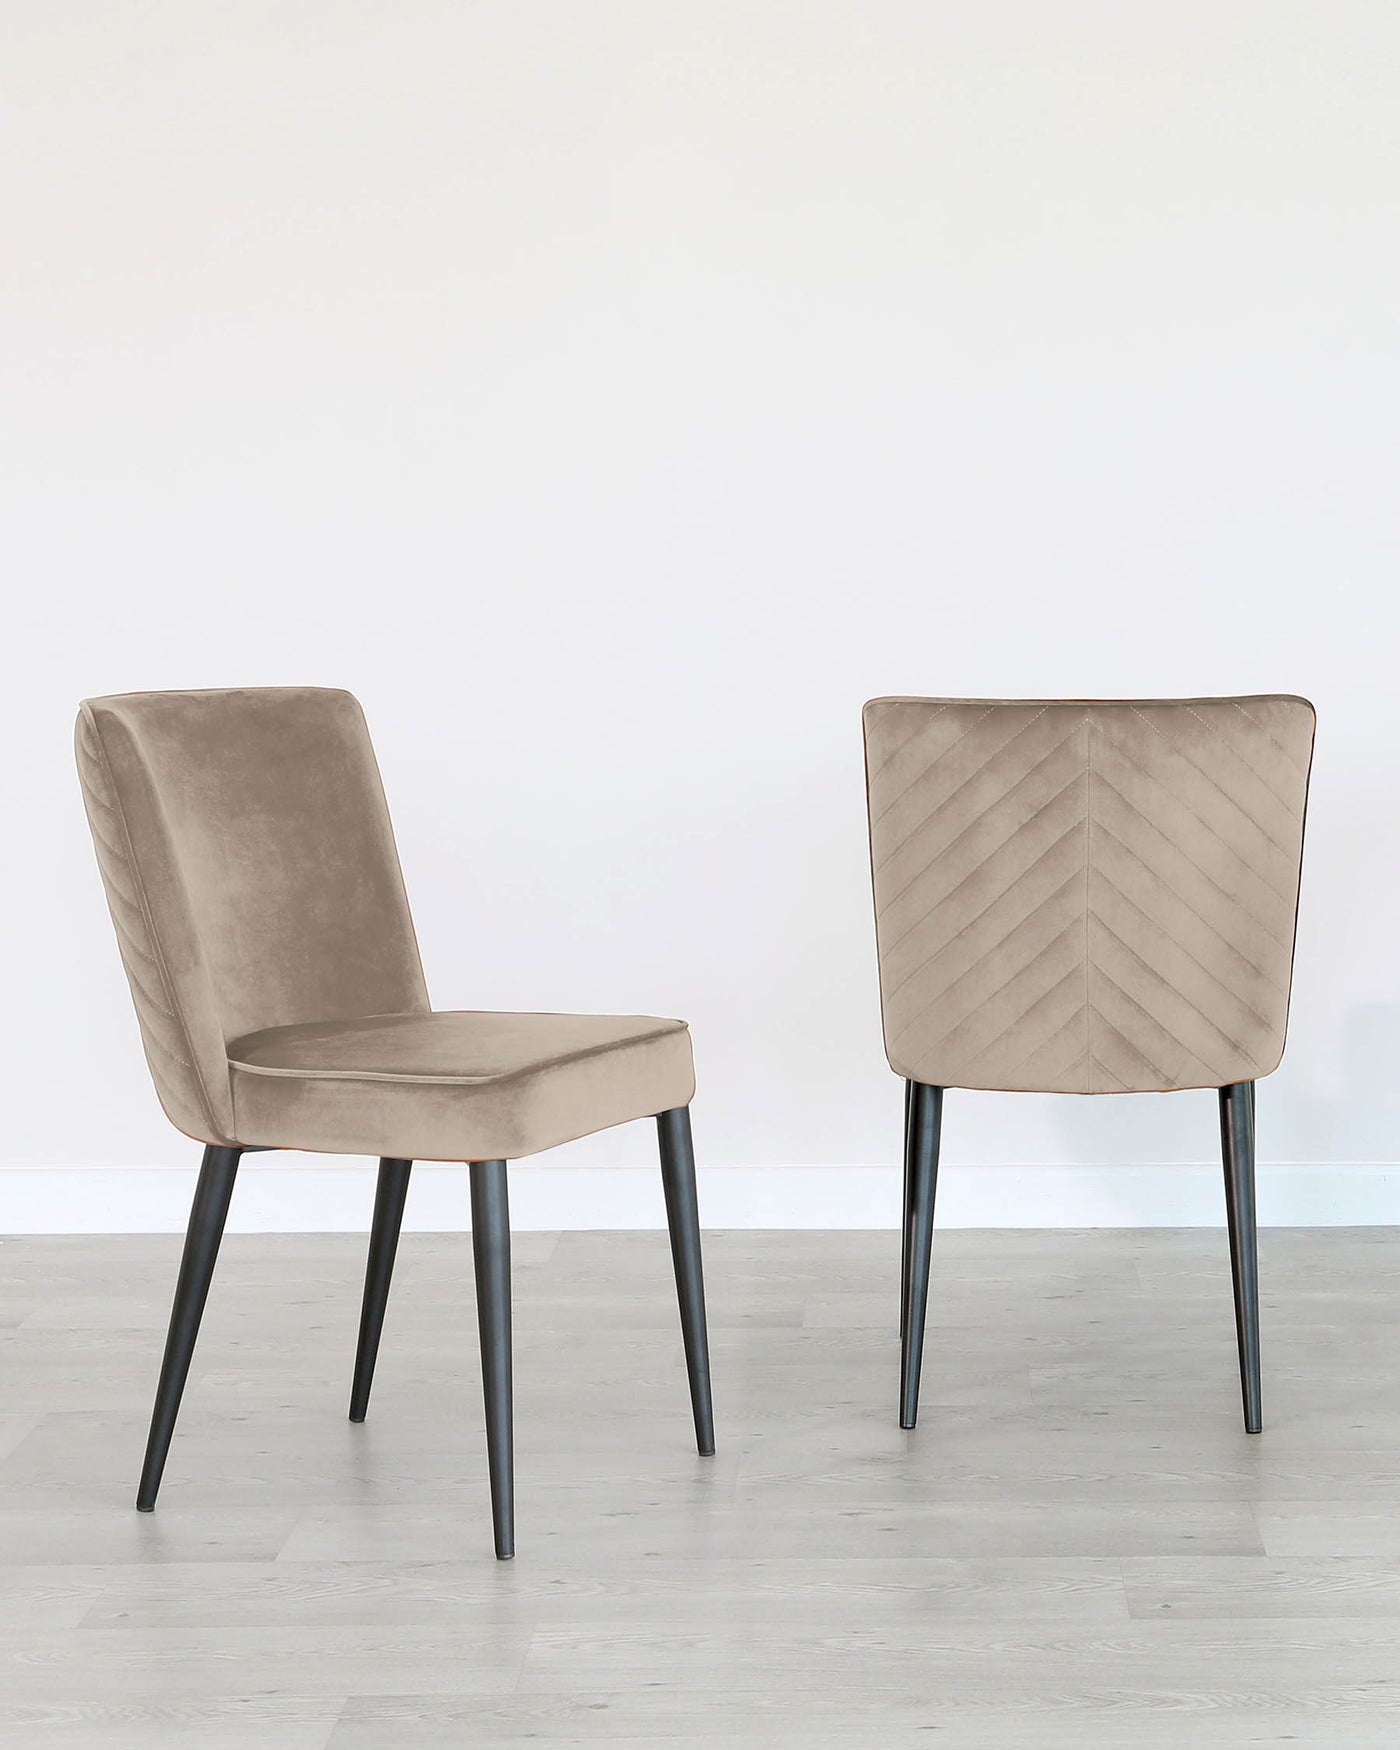 Two contemporary dining chairs with a minimalist design, featuring beige velvet upholstery and angular black metal legs. The chair visible from the front has a straight back, whereas the chair shown from the rear exhibits a distinctive chevron pattern stitching on the backrest.